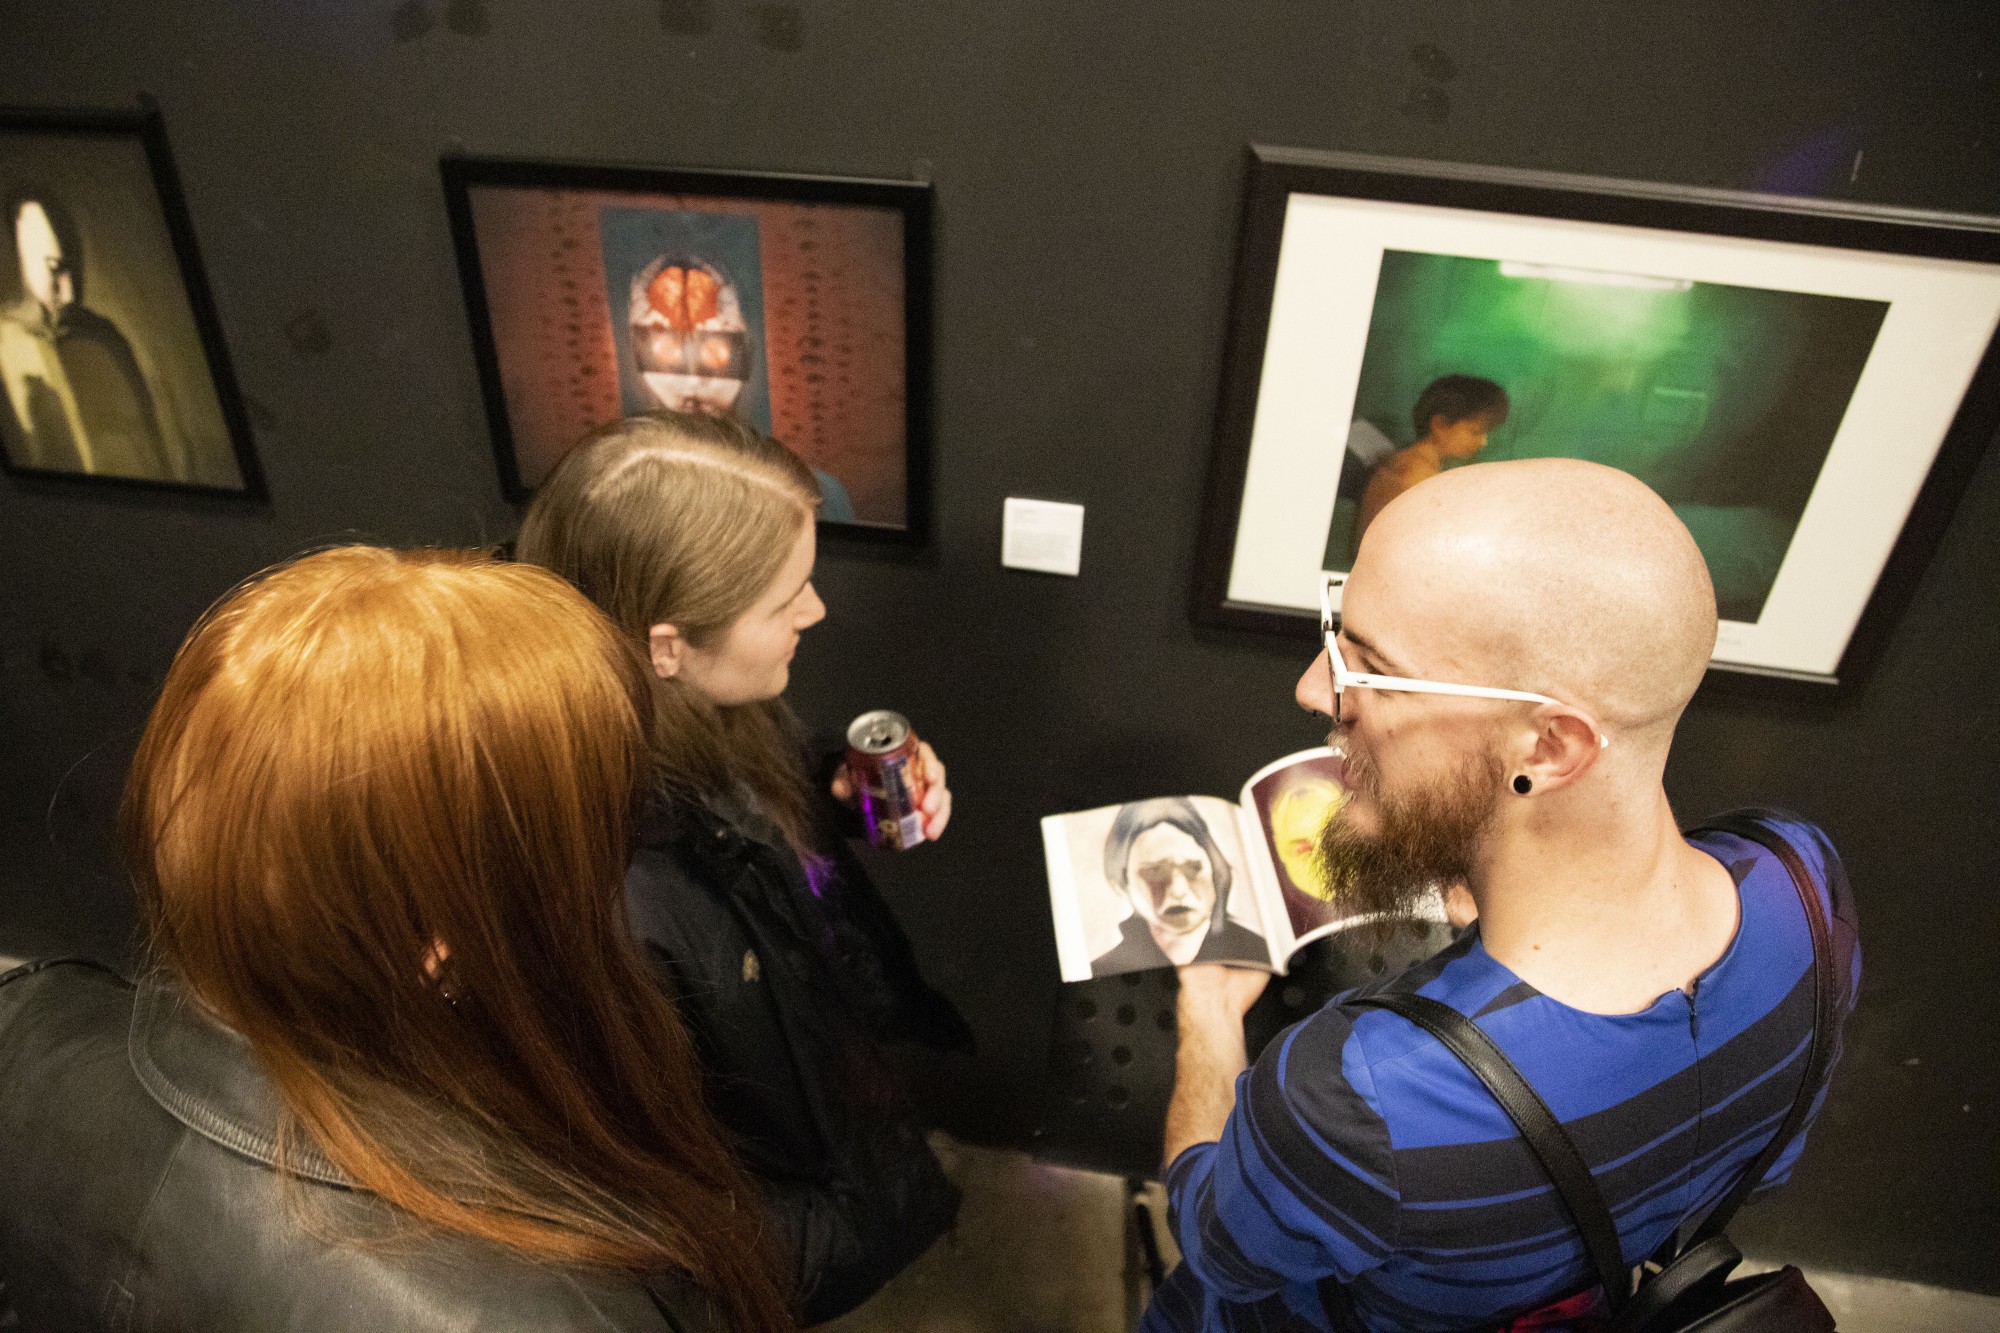 Chris Masanz, Ana Rockbell and Alec Lossiah admire art at Malleable, an exhibition by and for trans women and trans femme artists, in Minneapolis on Thursday, Nov. 7.